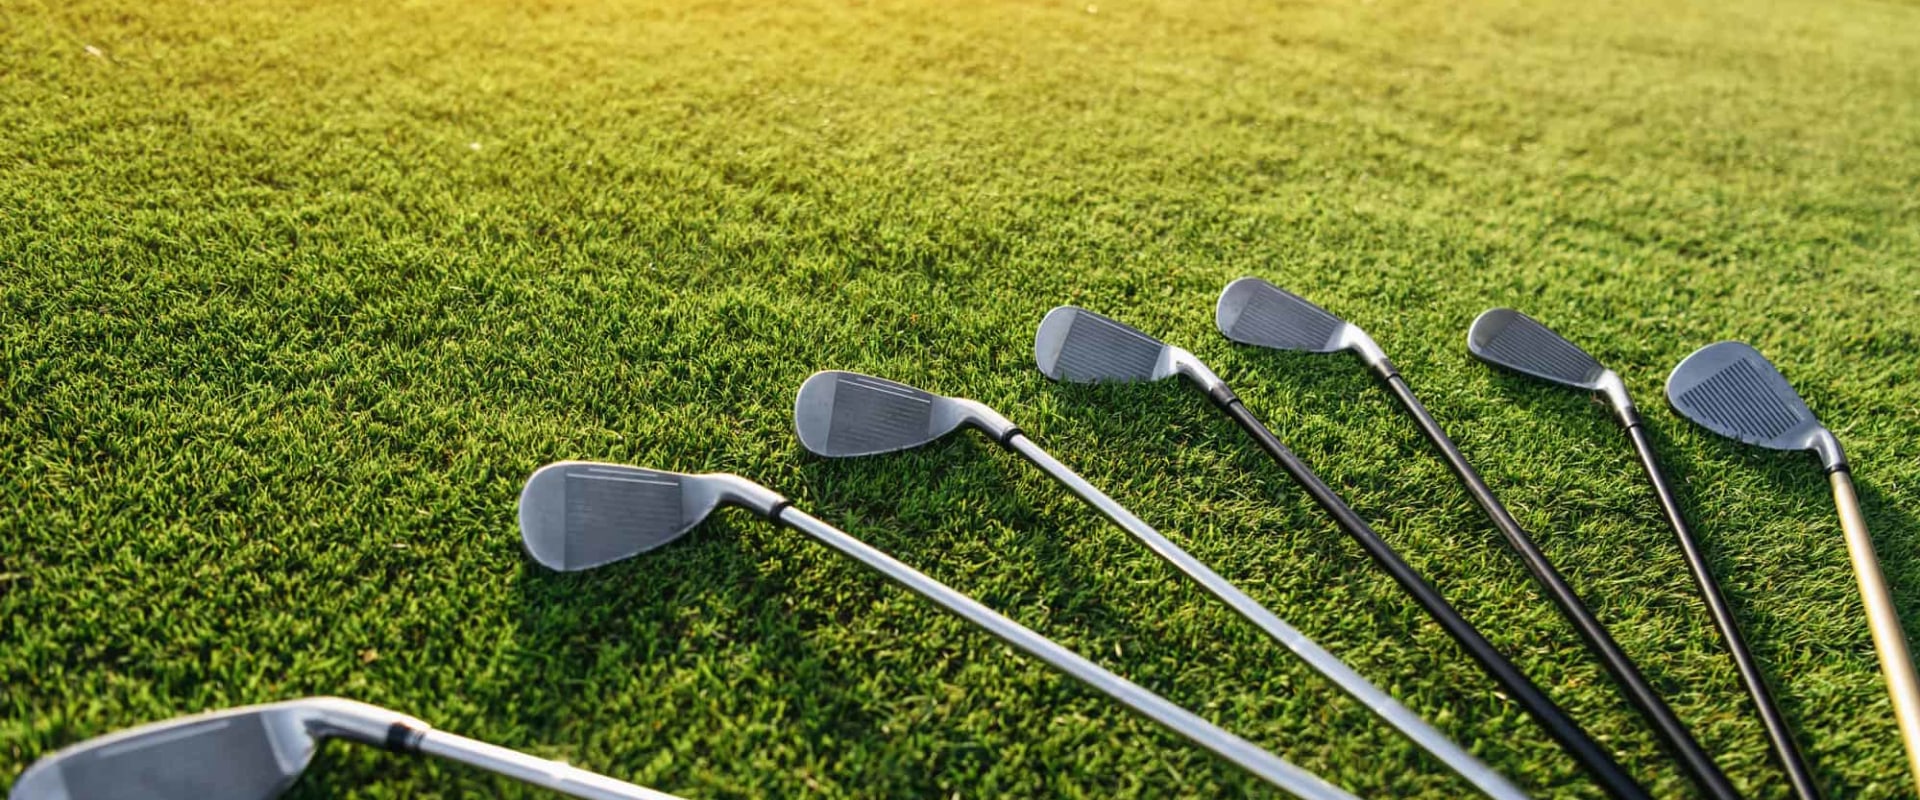 How Much Does the Average Golf Clubs Cost? A Comprehensive Guide